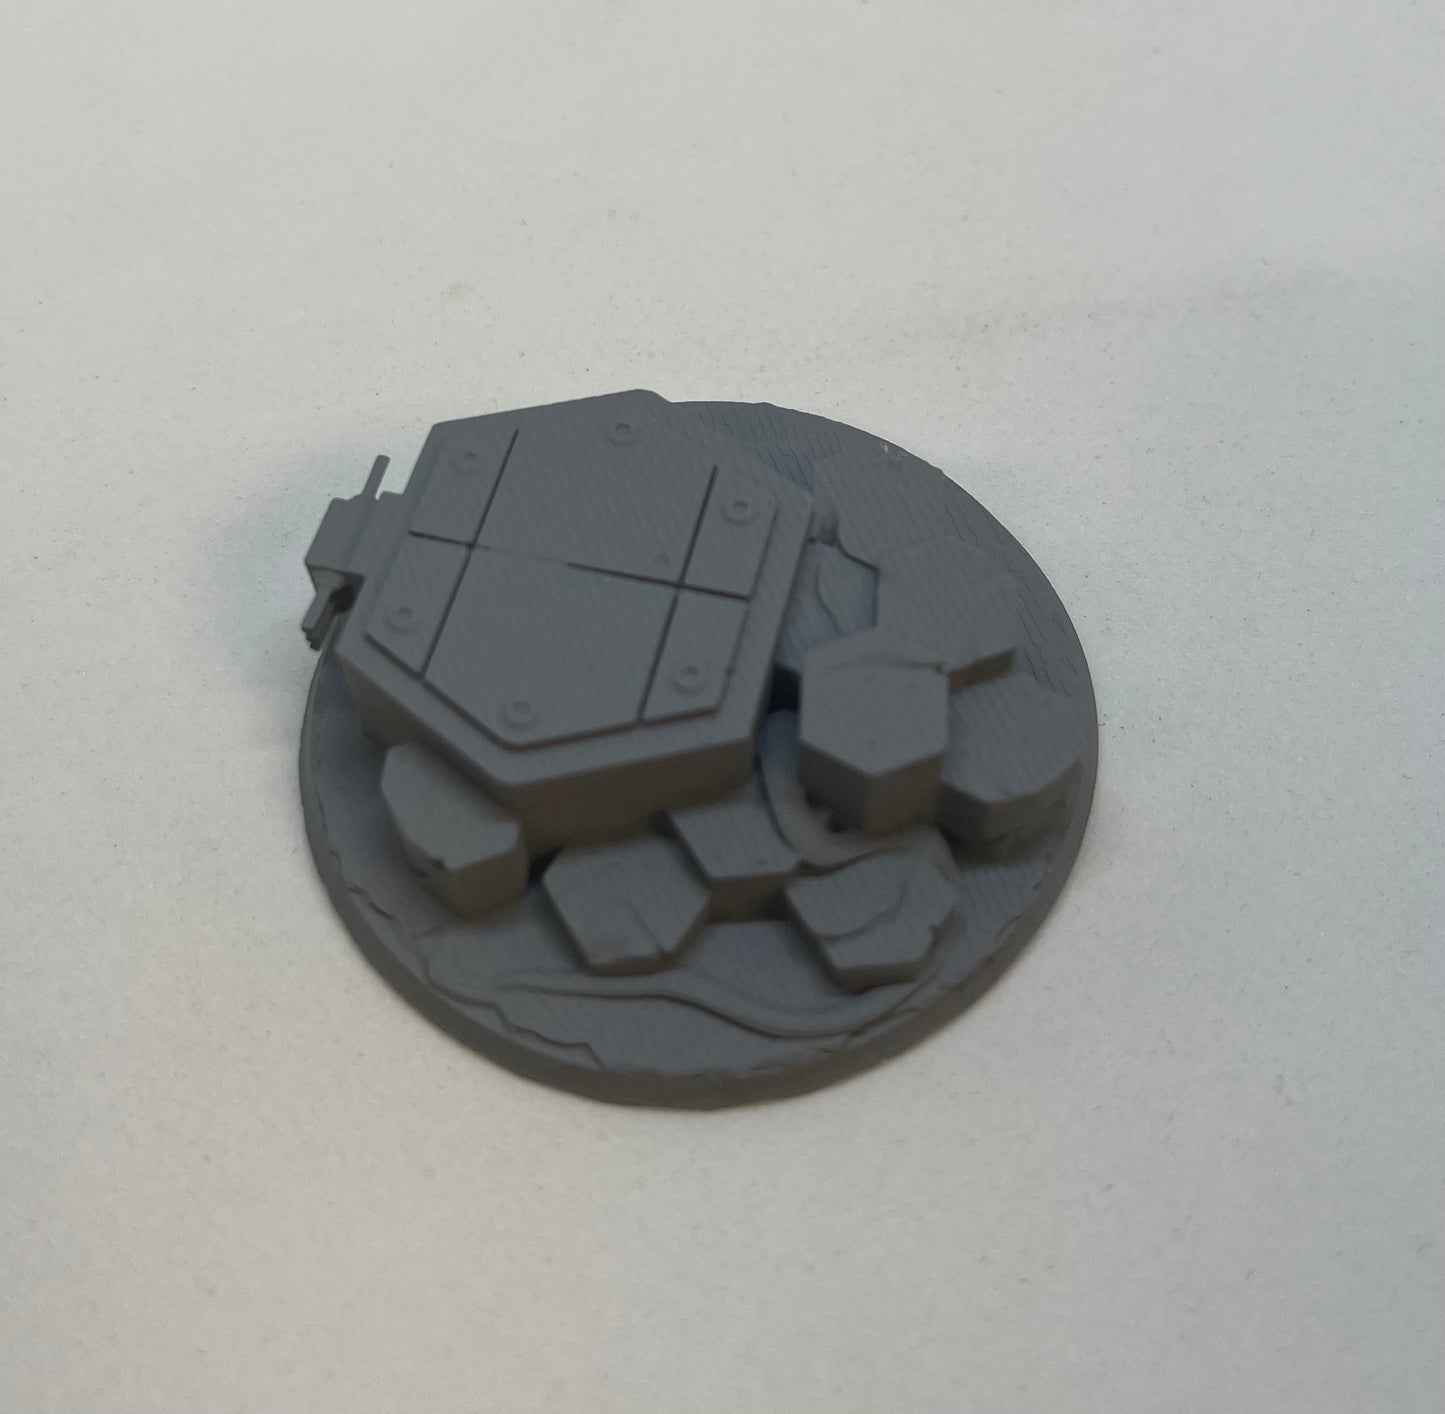 50mm Hex Style Bases Set of X3